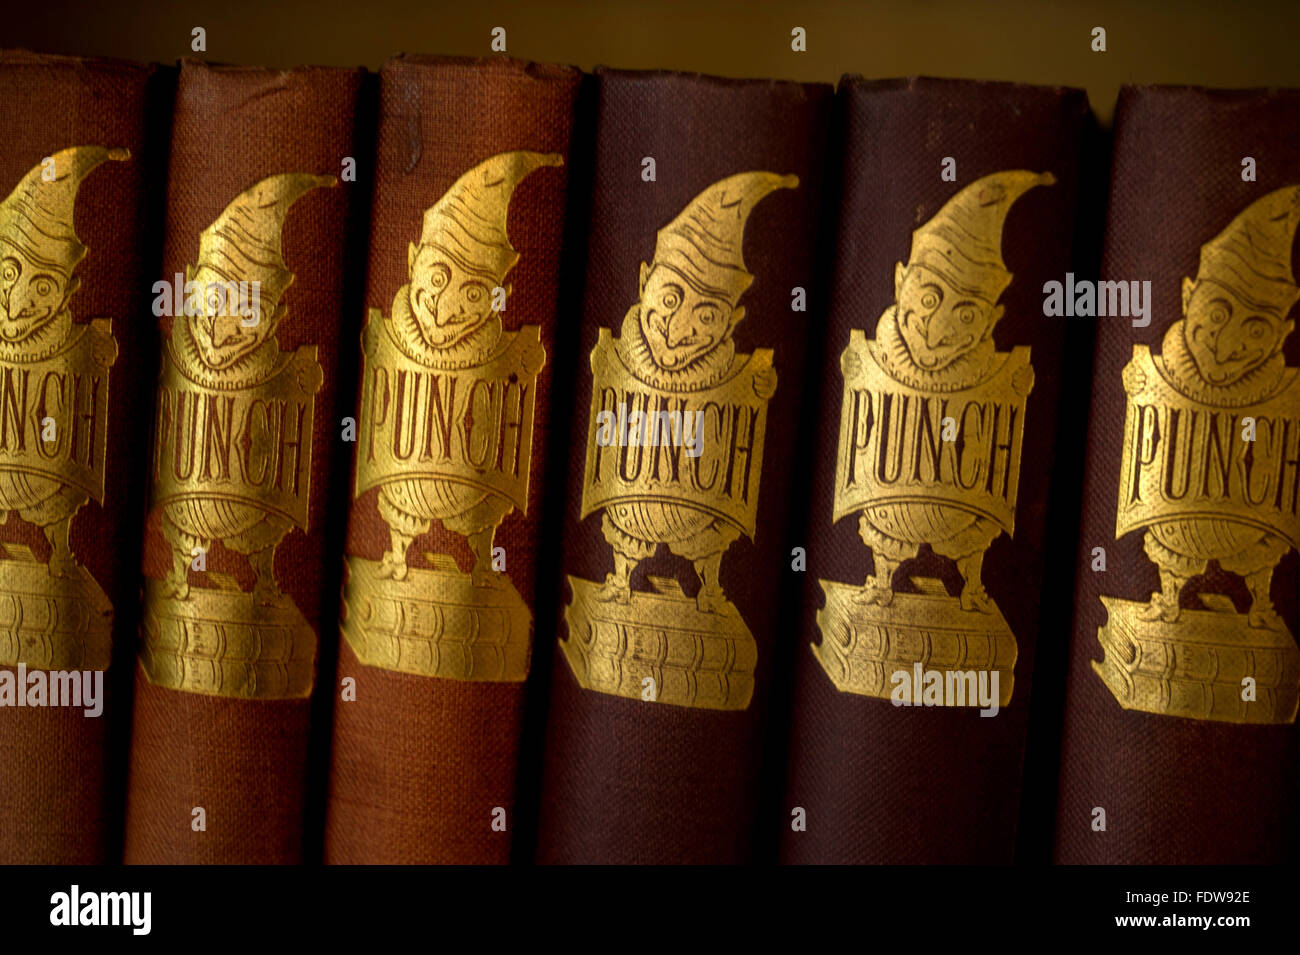 Spines of antique volumes of Punch magazine Stock Photo